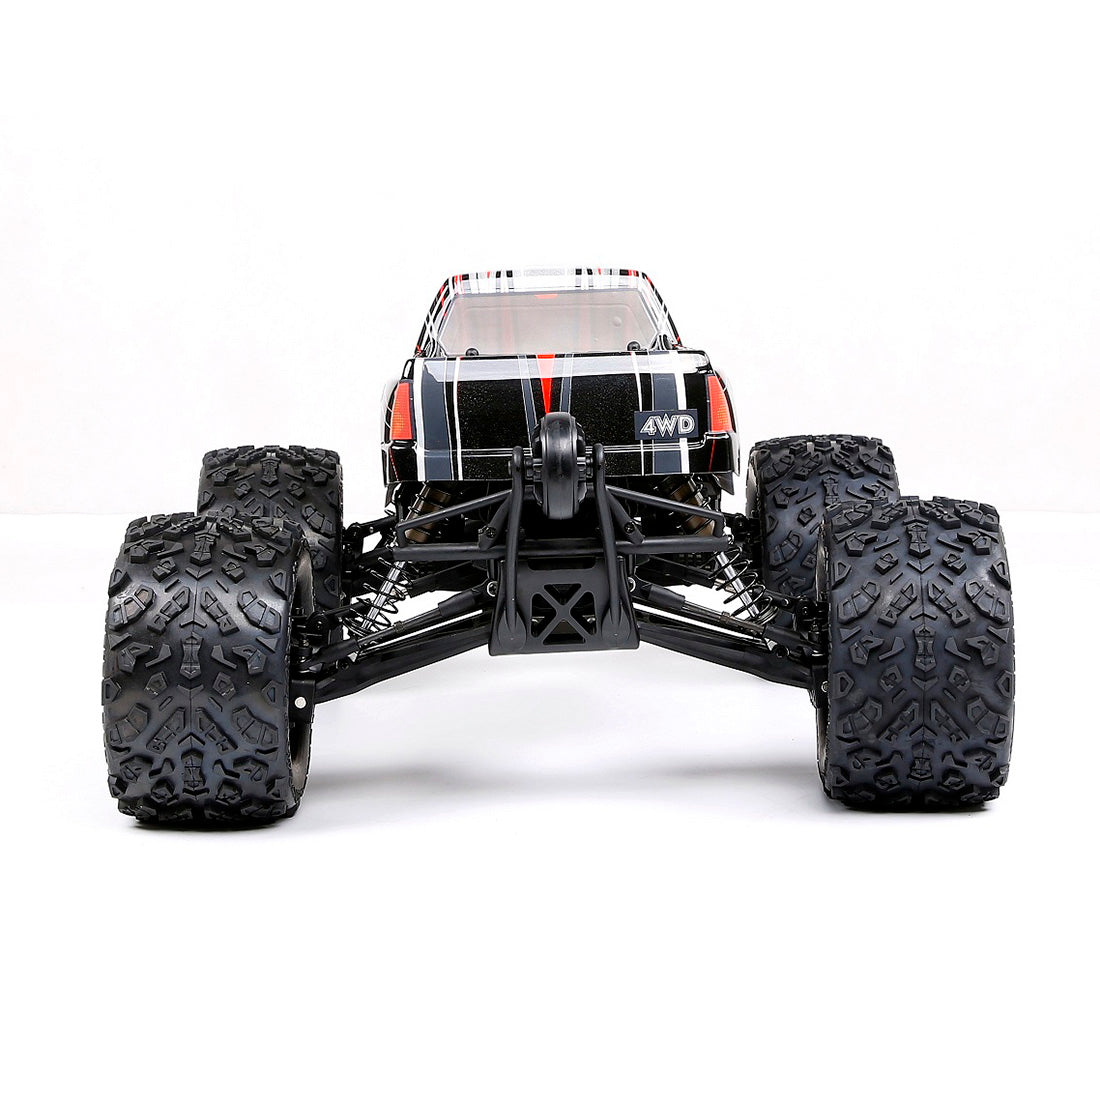 Rovan TORLAND XL EV6 1/8 4WD 2.4G High Speed RC Brushless Pickup Truck Model Car with Center Differential